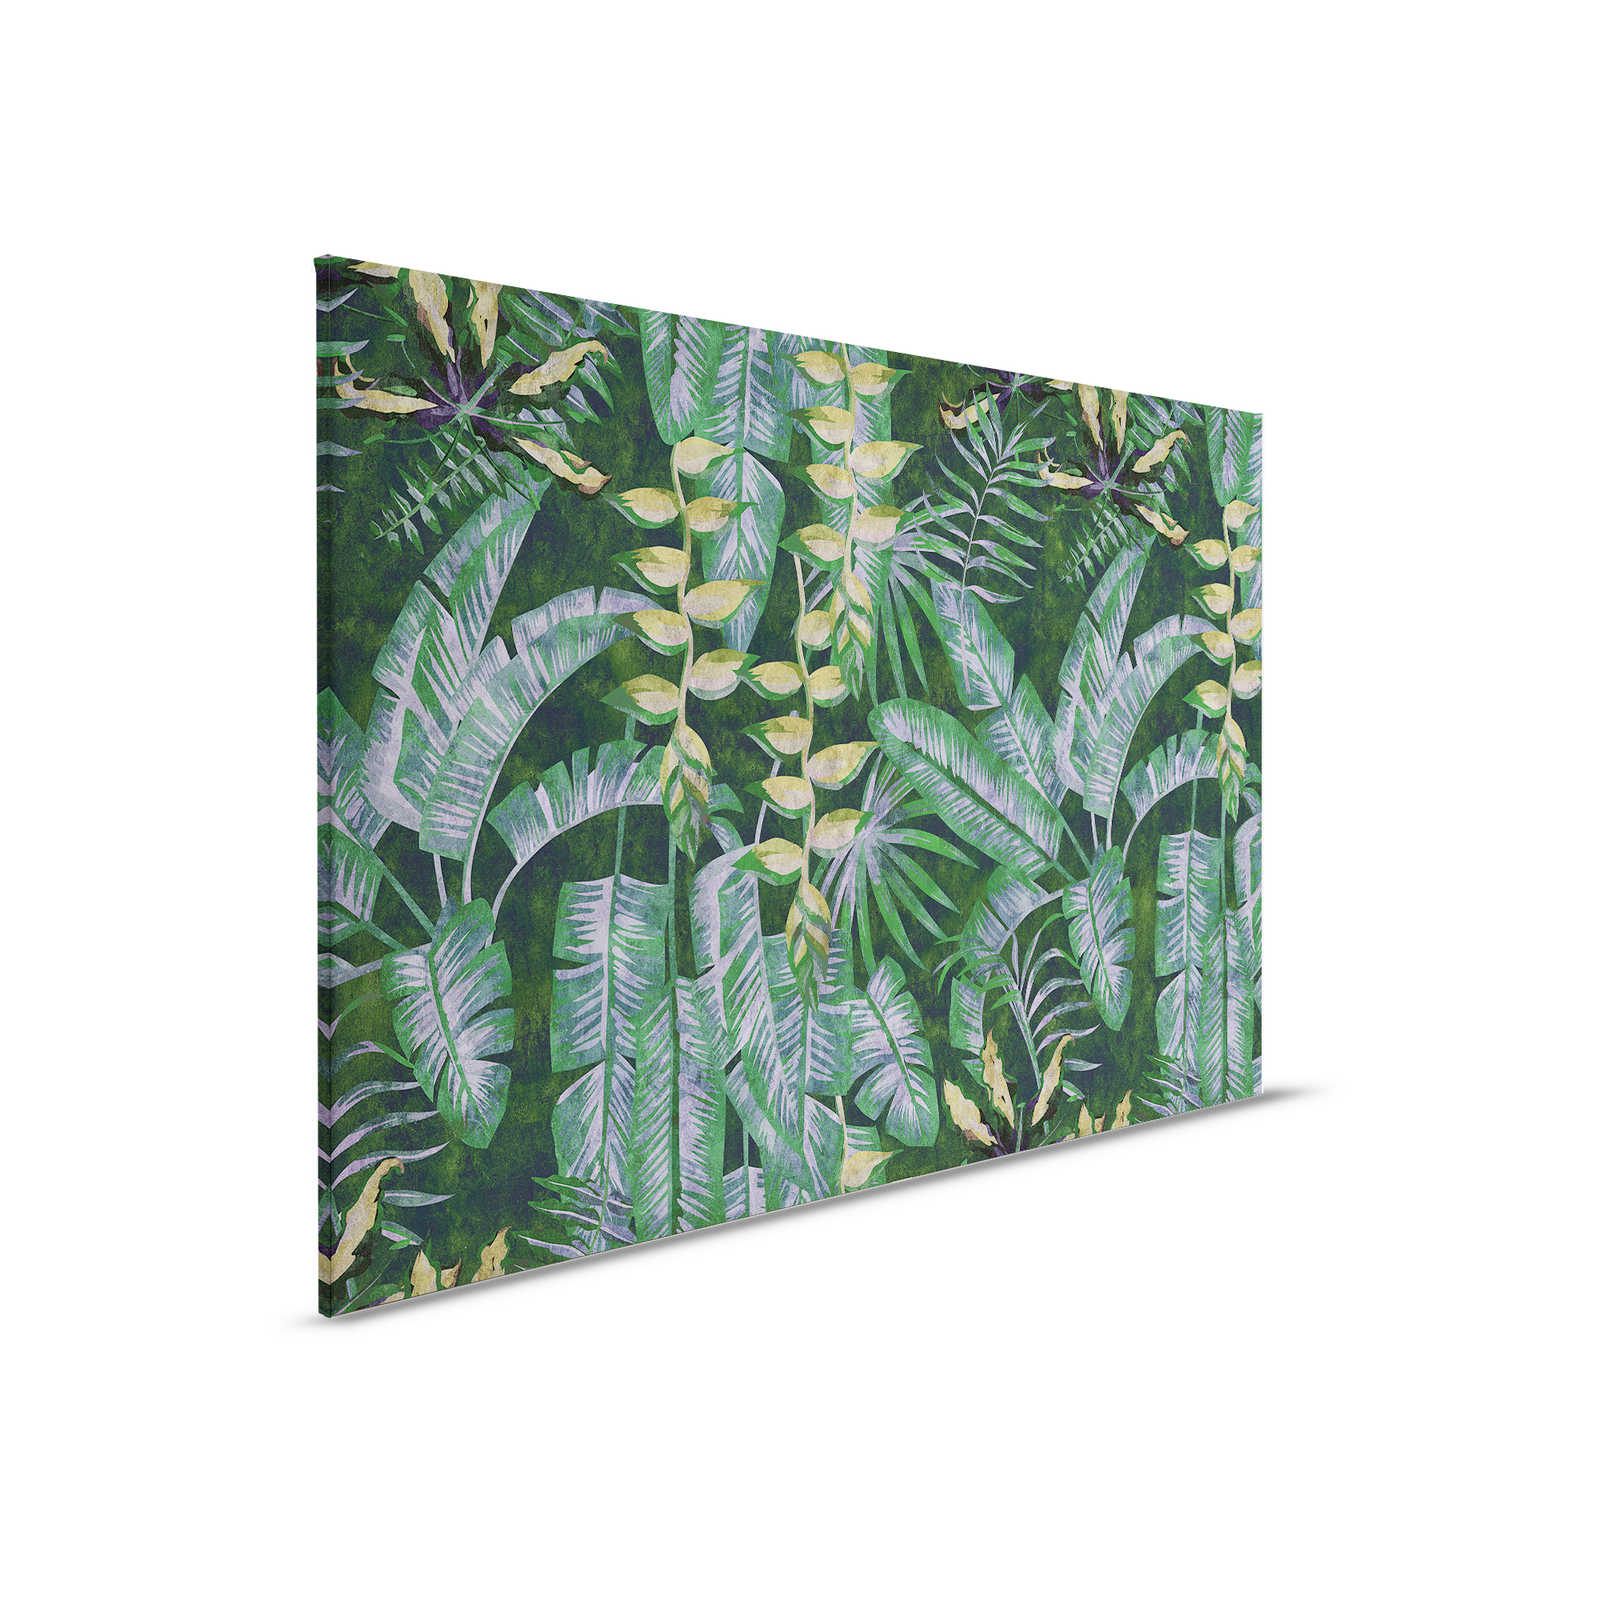 Tropicana 2 - Canvas painting with tropical plants - 0.90 m x 0.60 m
